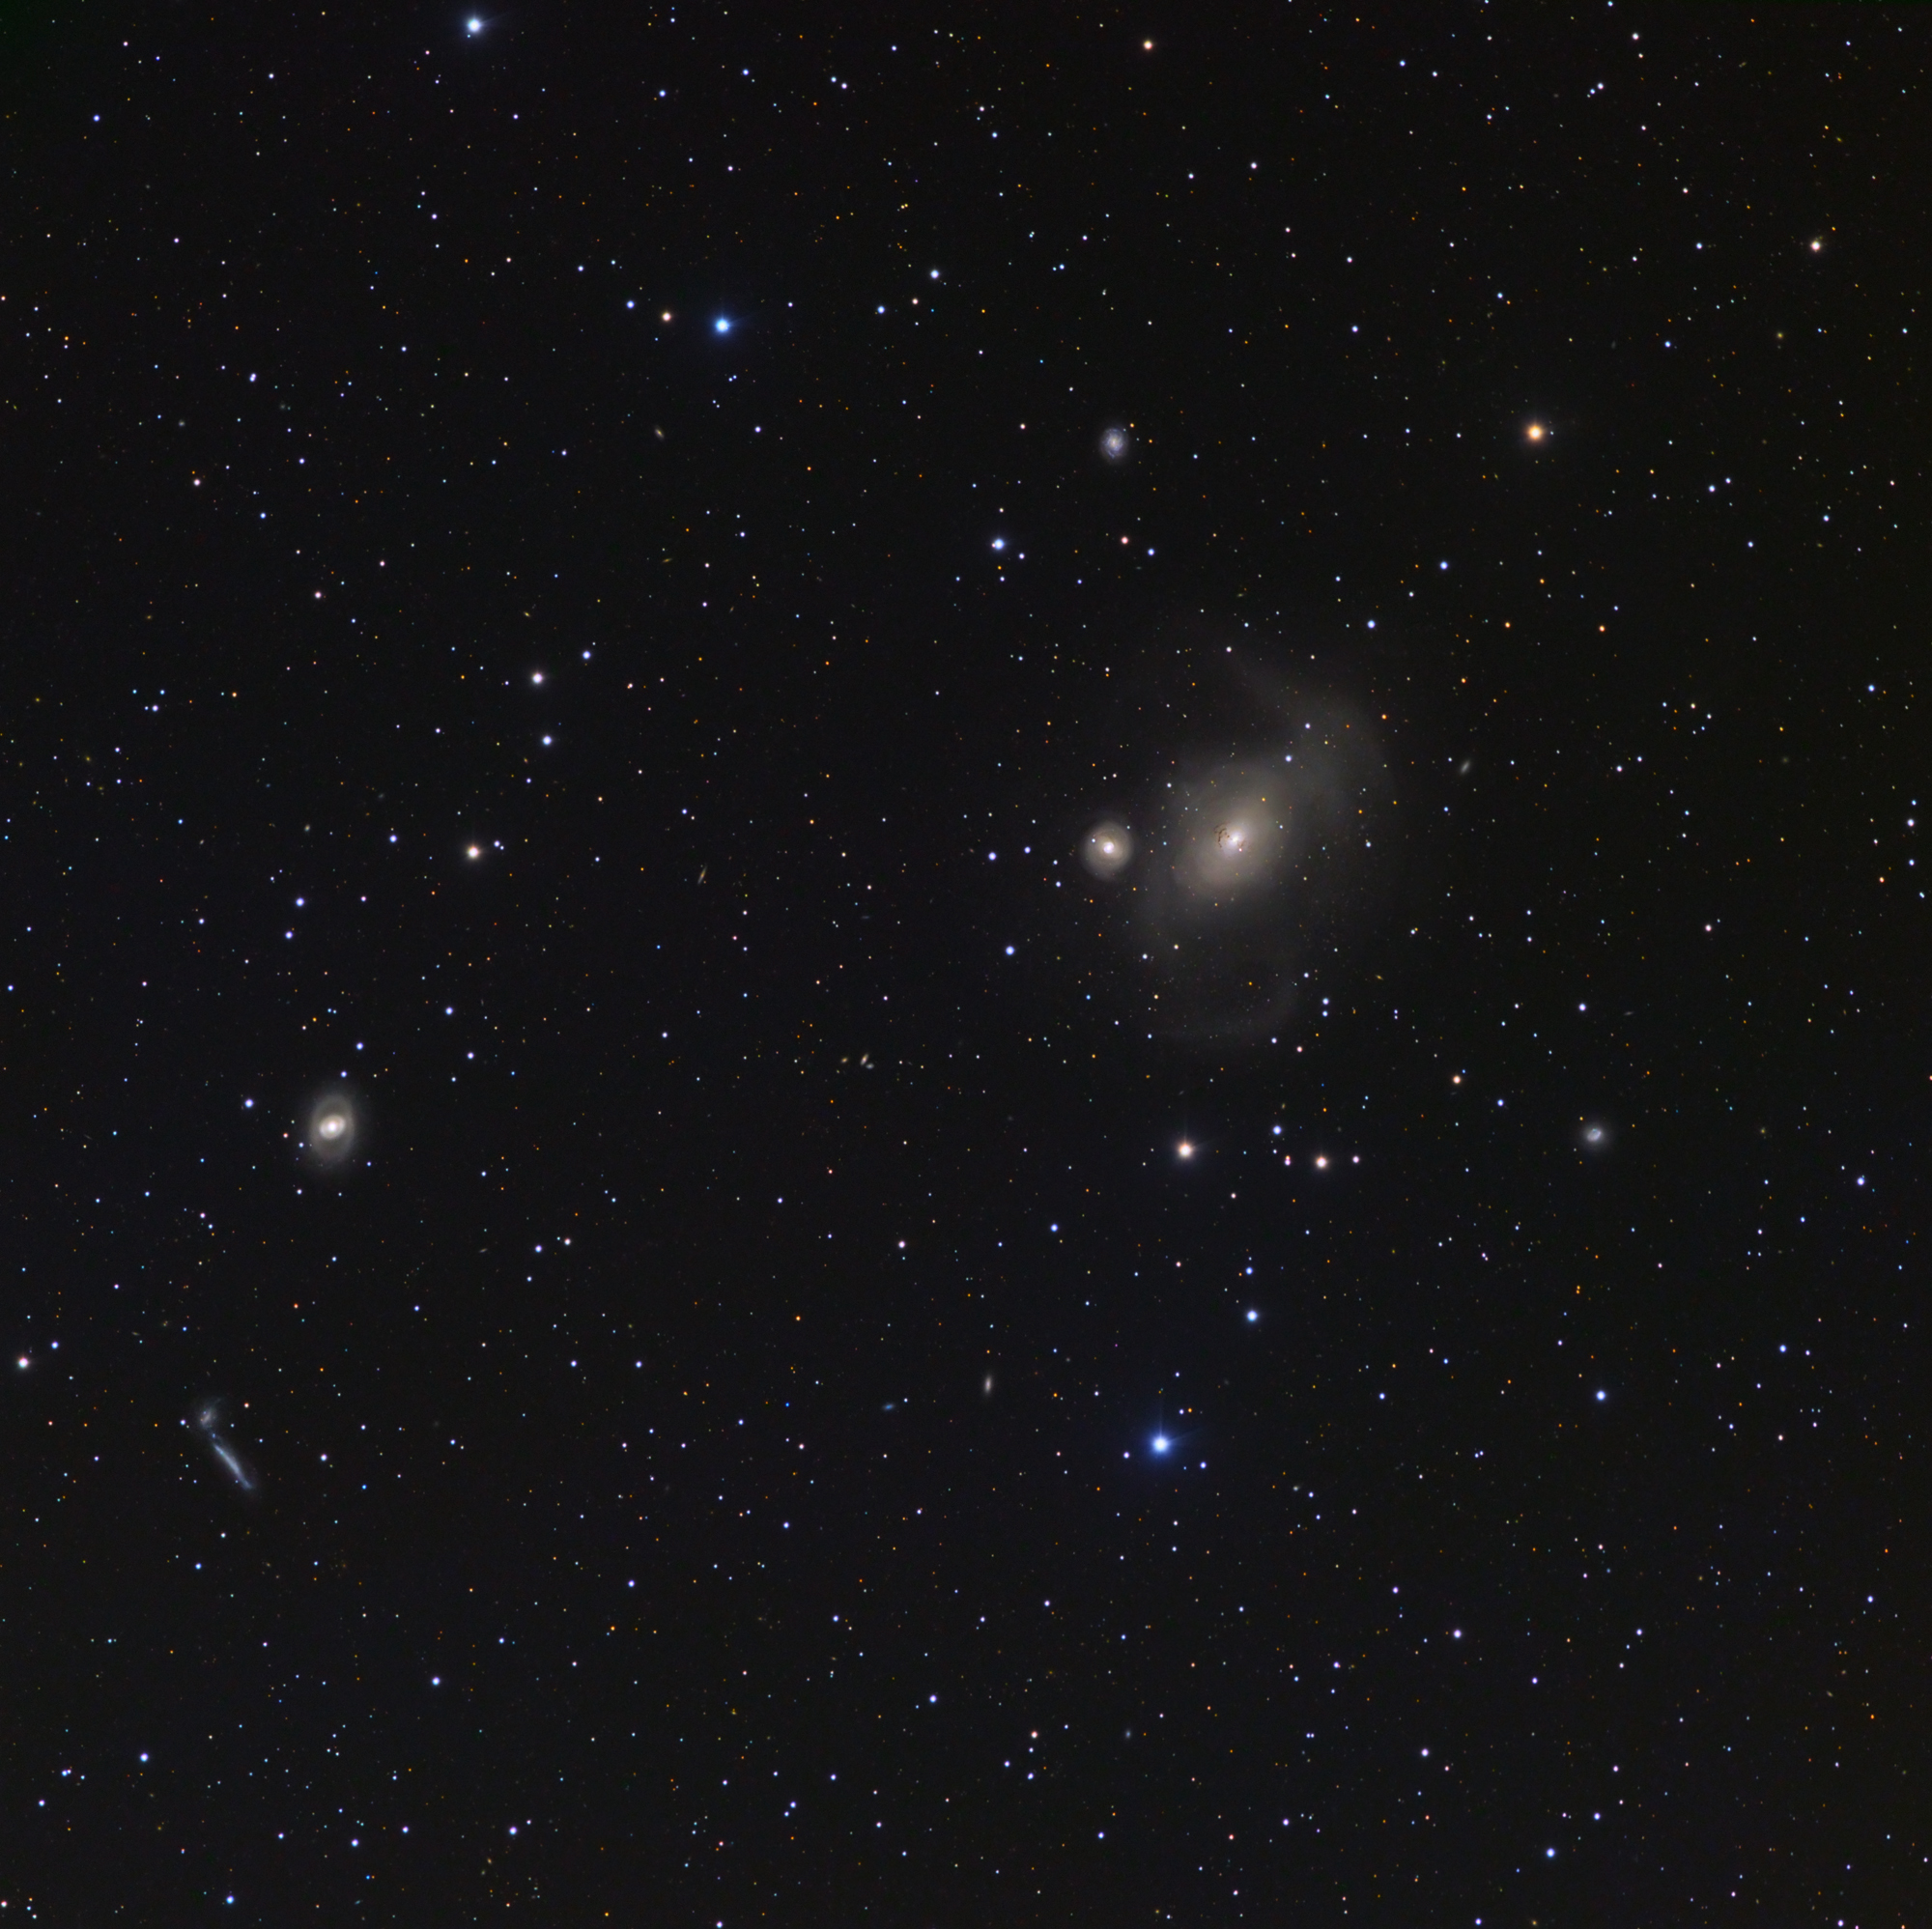 NGC 1316 Galaxy Group full frame (50% res)